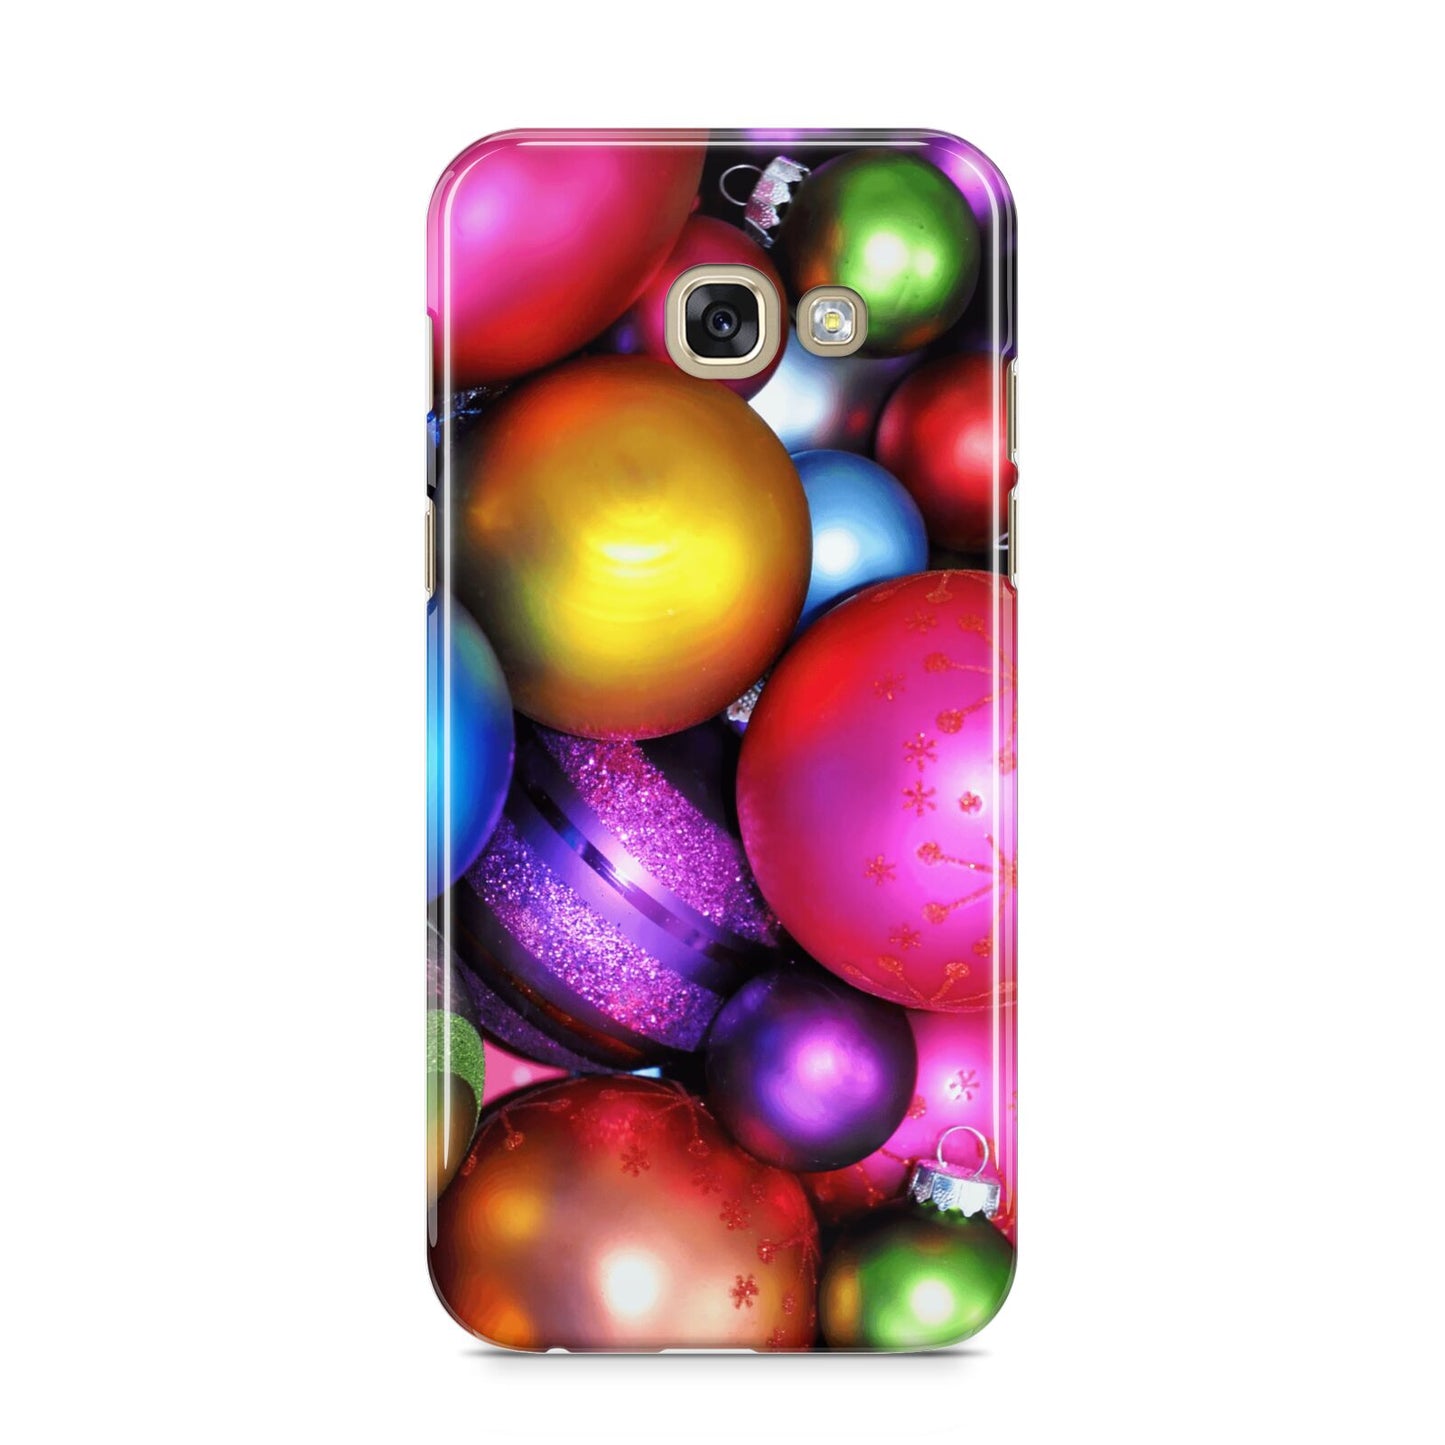 Bauble Samsung Galaxy A5 2017 Case on gold phone